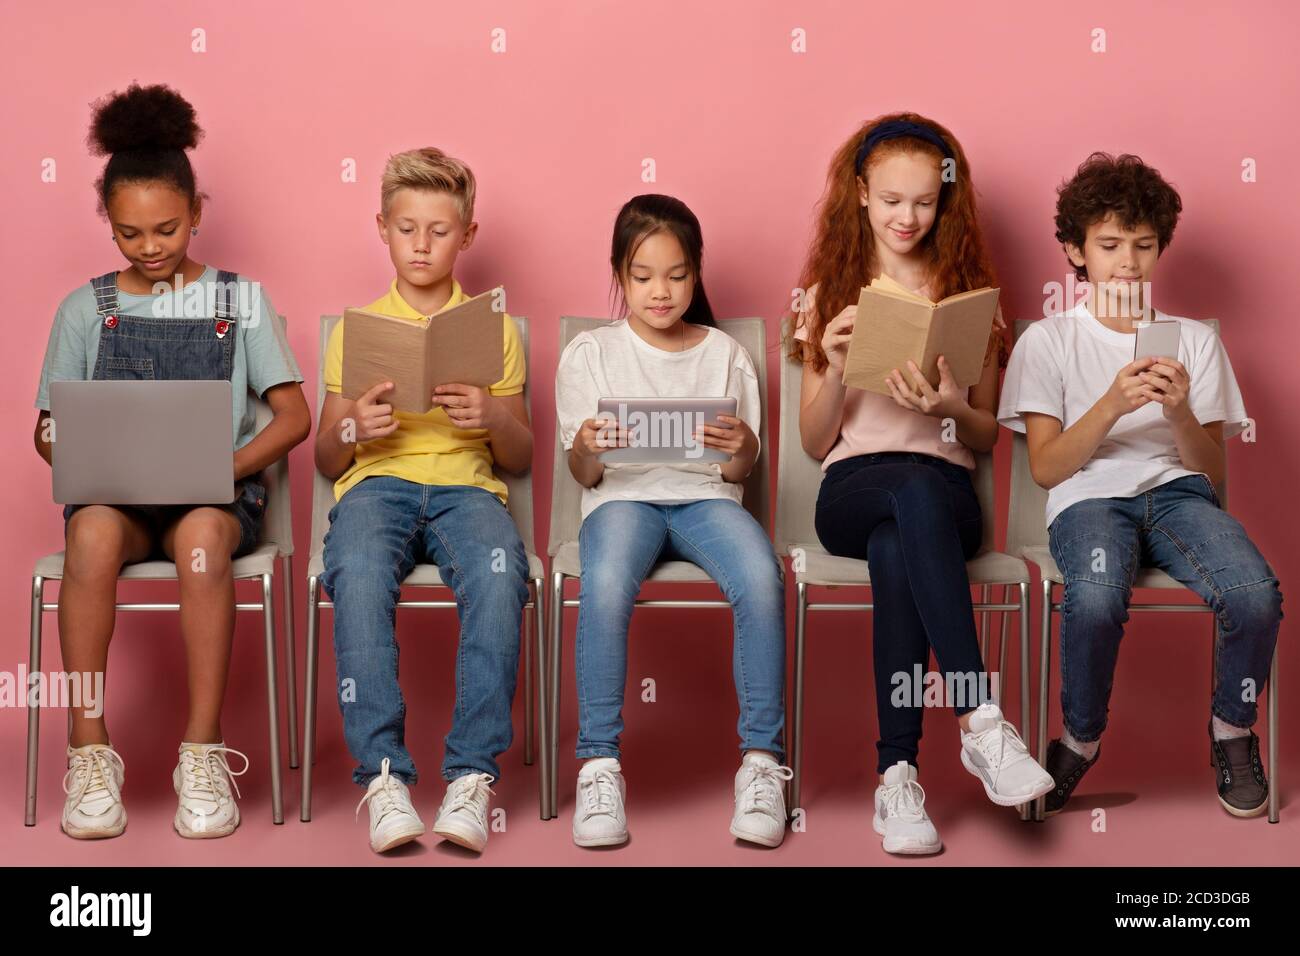 E-learning concept. Focused diverse schoolkids with gadgets and study materials sitting on chairs over pink background Stock Photo